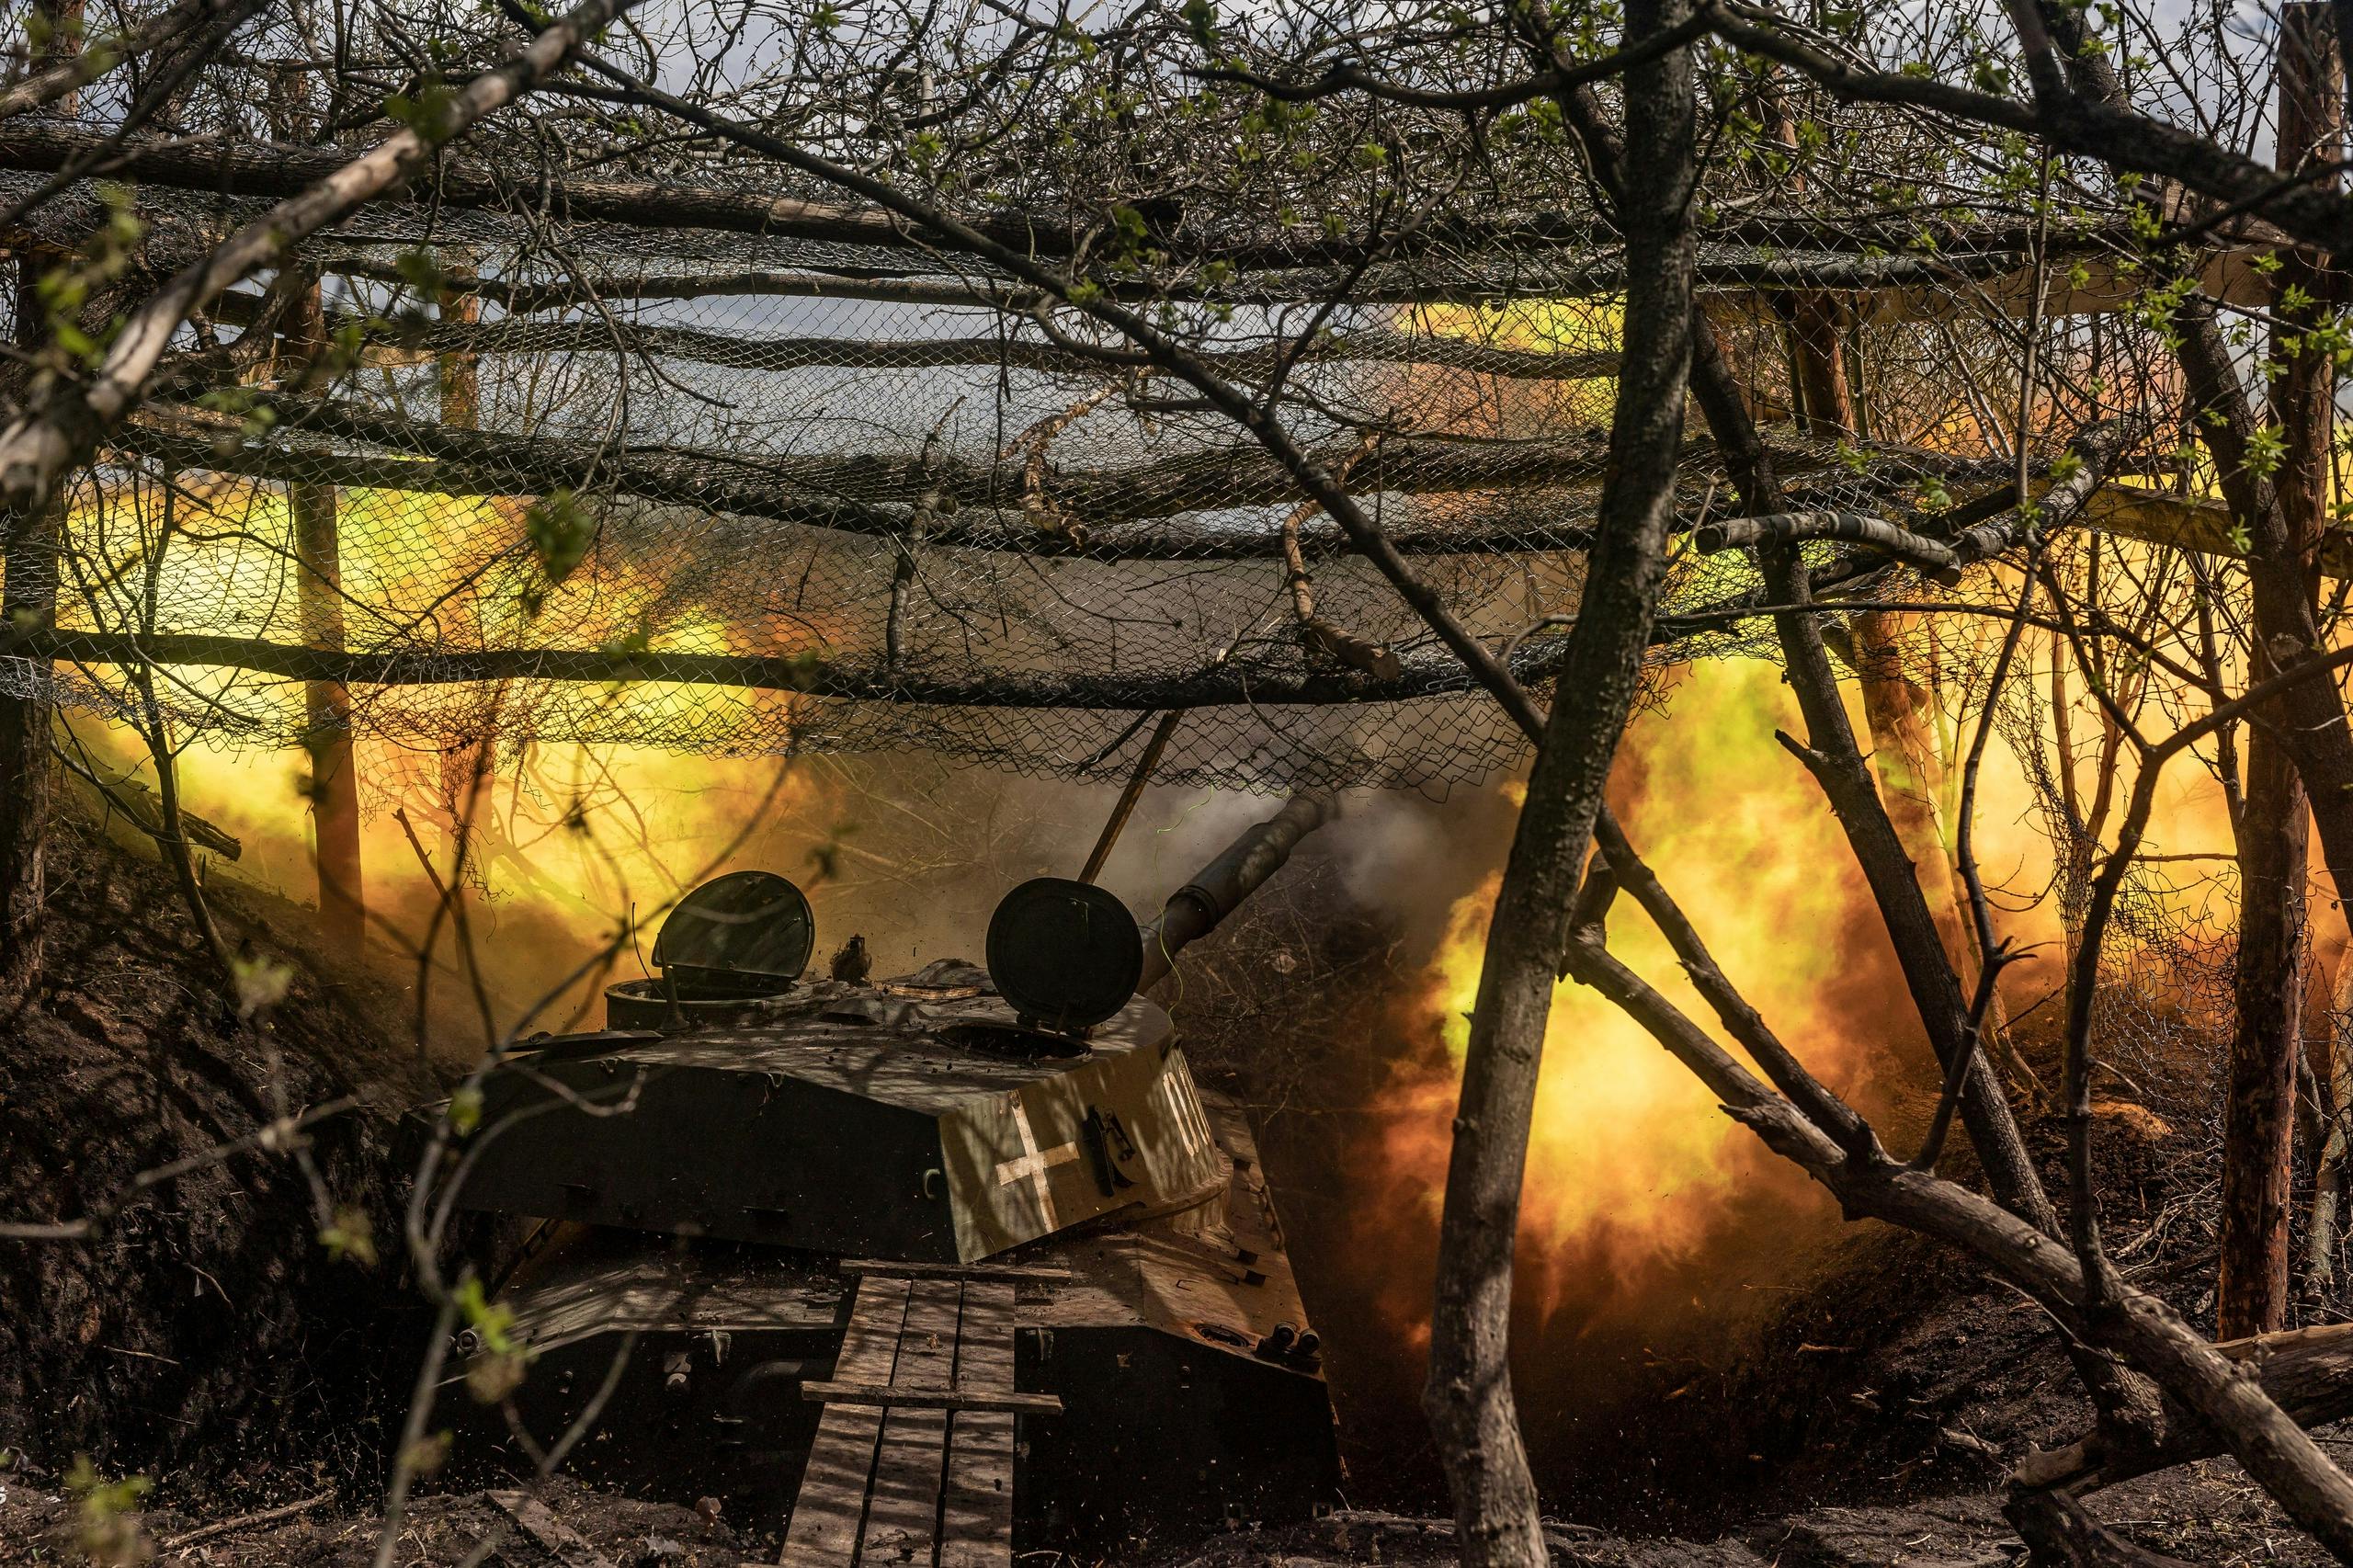 Americans take the failed Ukrainian offensive seriously